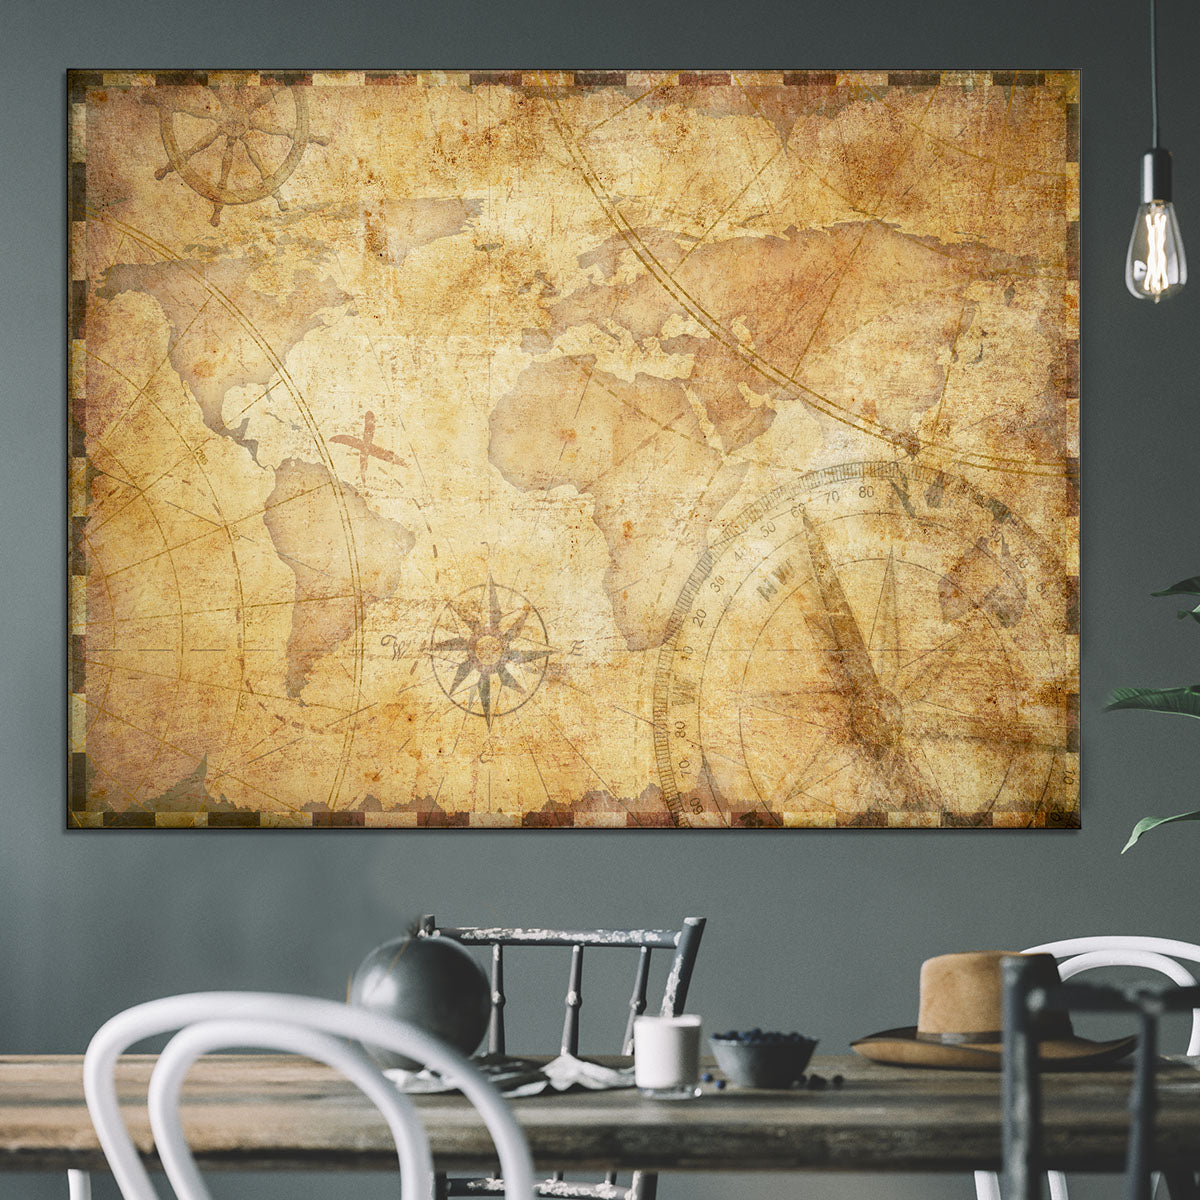 old nautical treasure map illustration Canvas Print or Poster